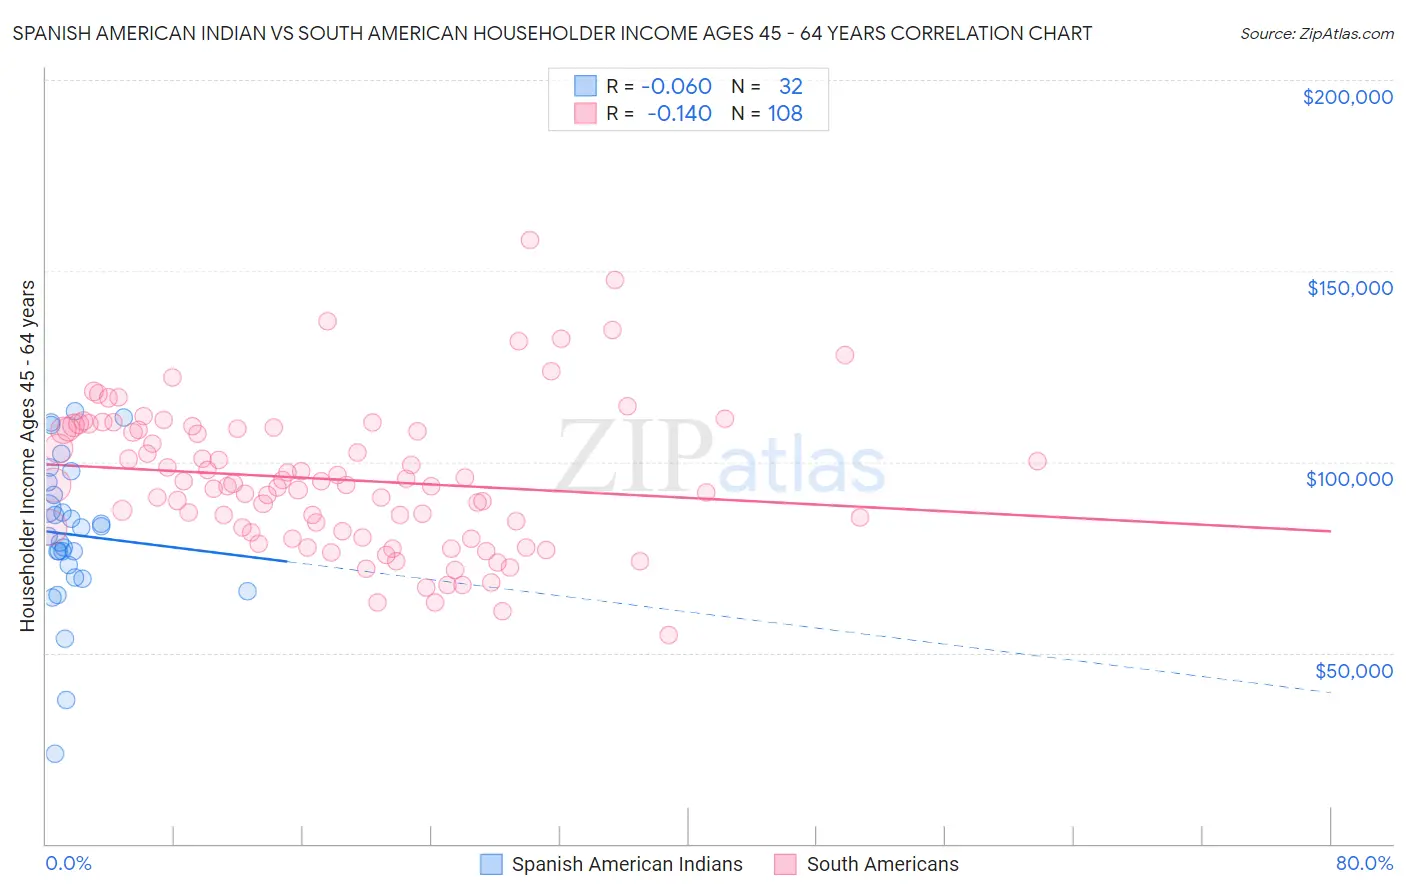 Spanish American Indian vs South American Householder Income Ages 45 - 64 years